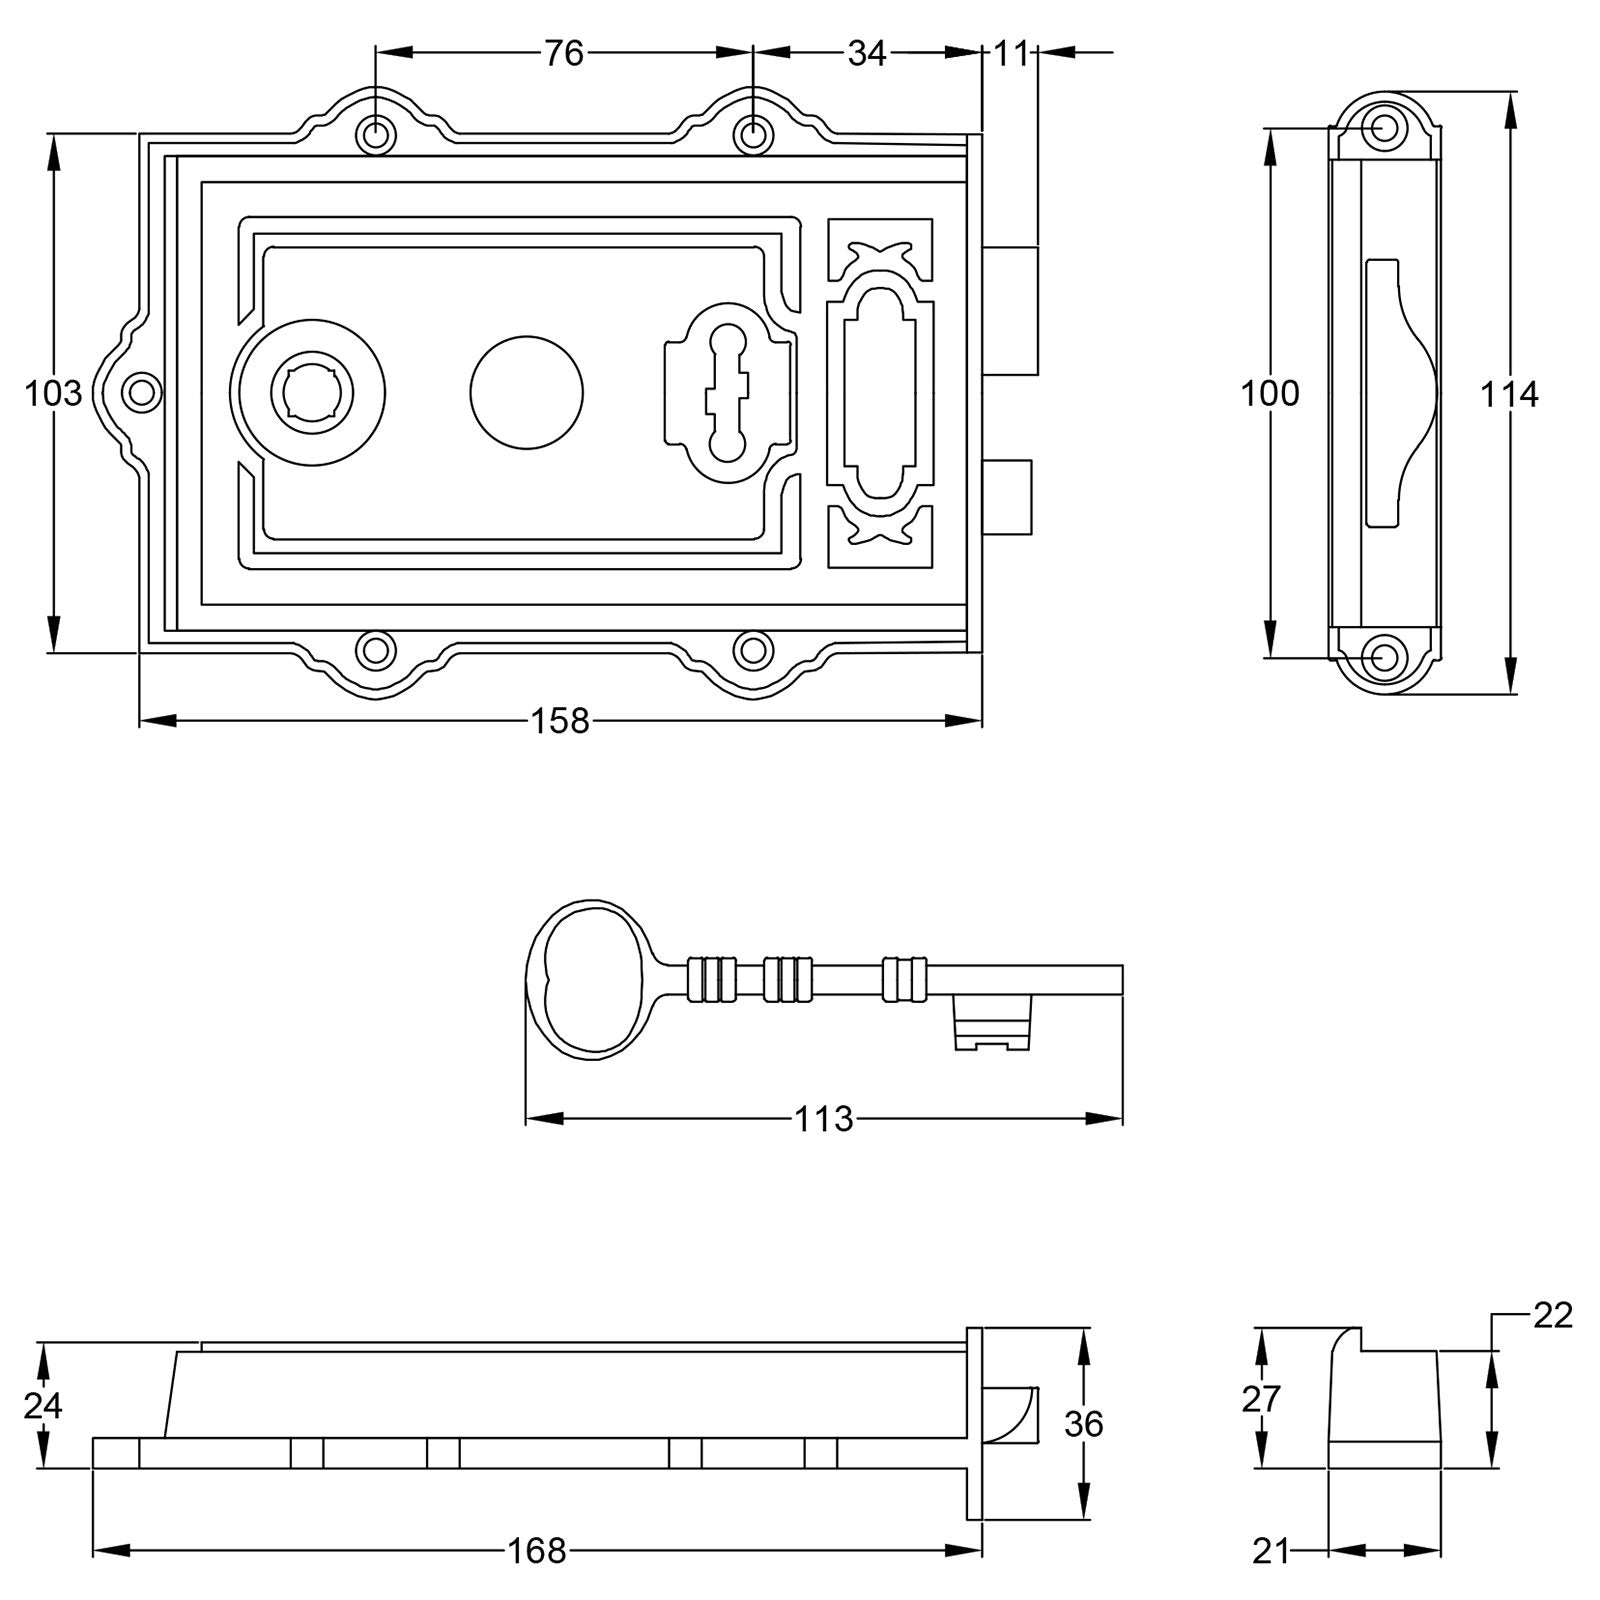 SHOW Technical Drawing of Ornate Rim Lock